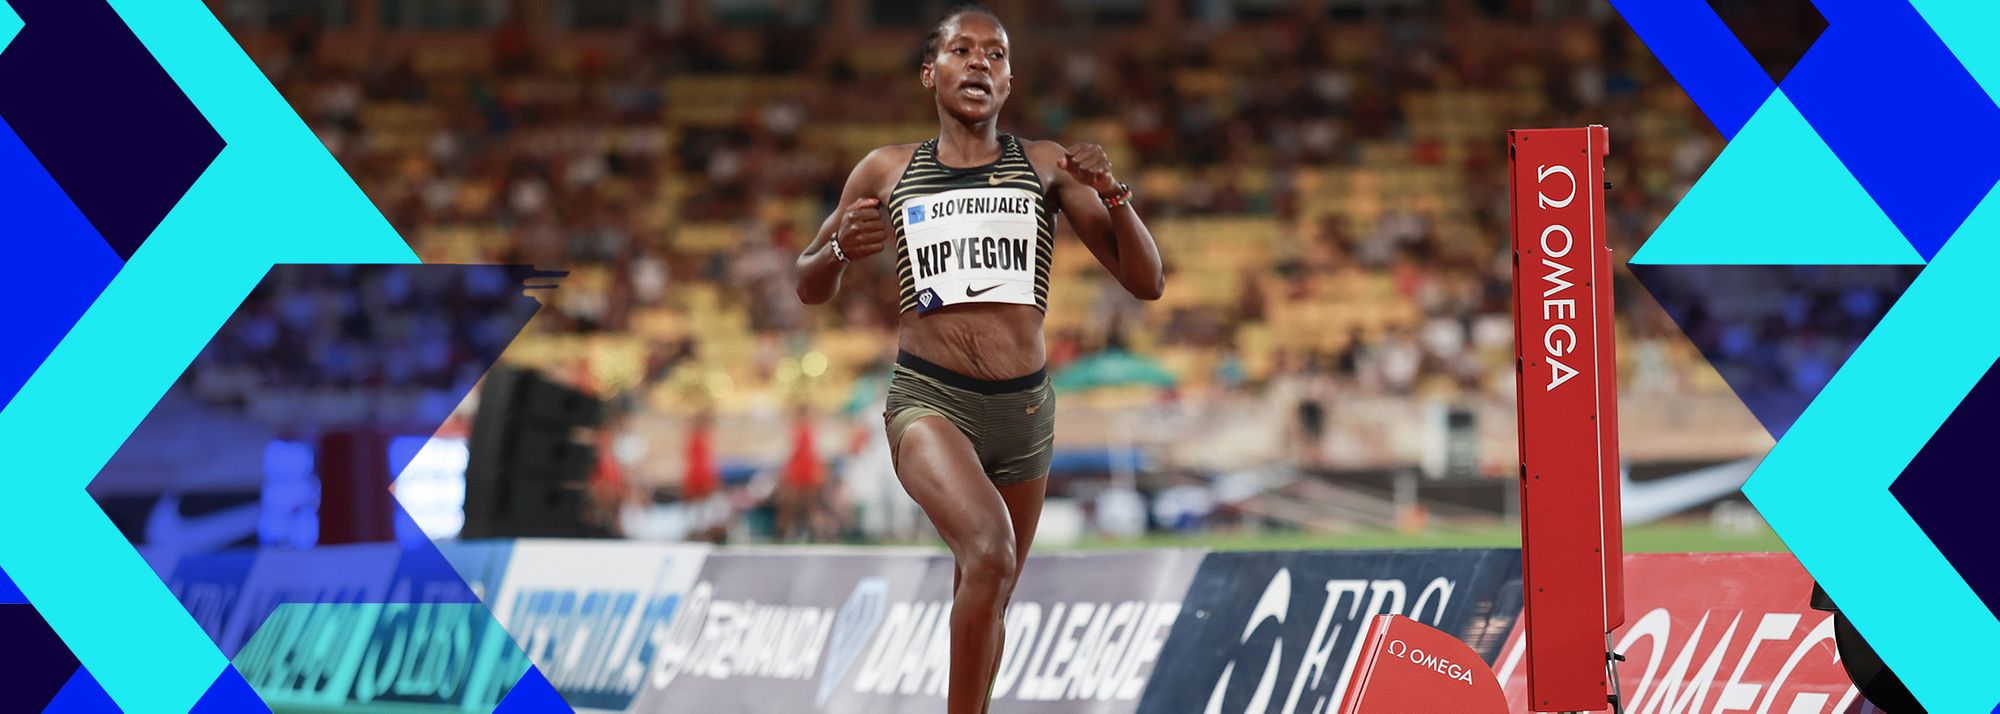 Faith Kipyegon comes within 0.3 of world 1500m record, Fraser-Pryce dashes to 10.62 over 100m